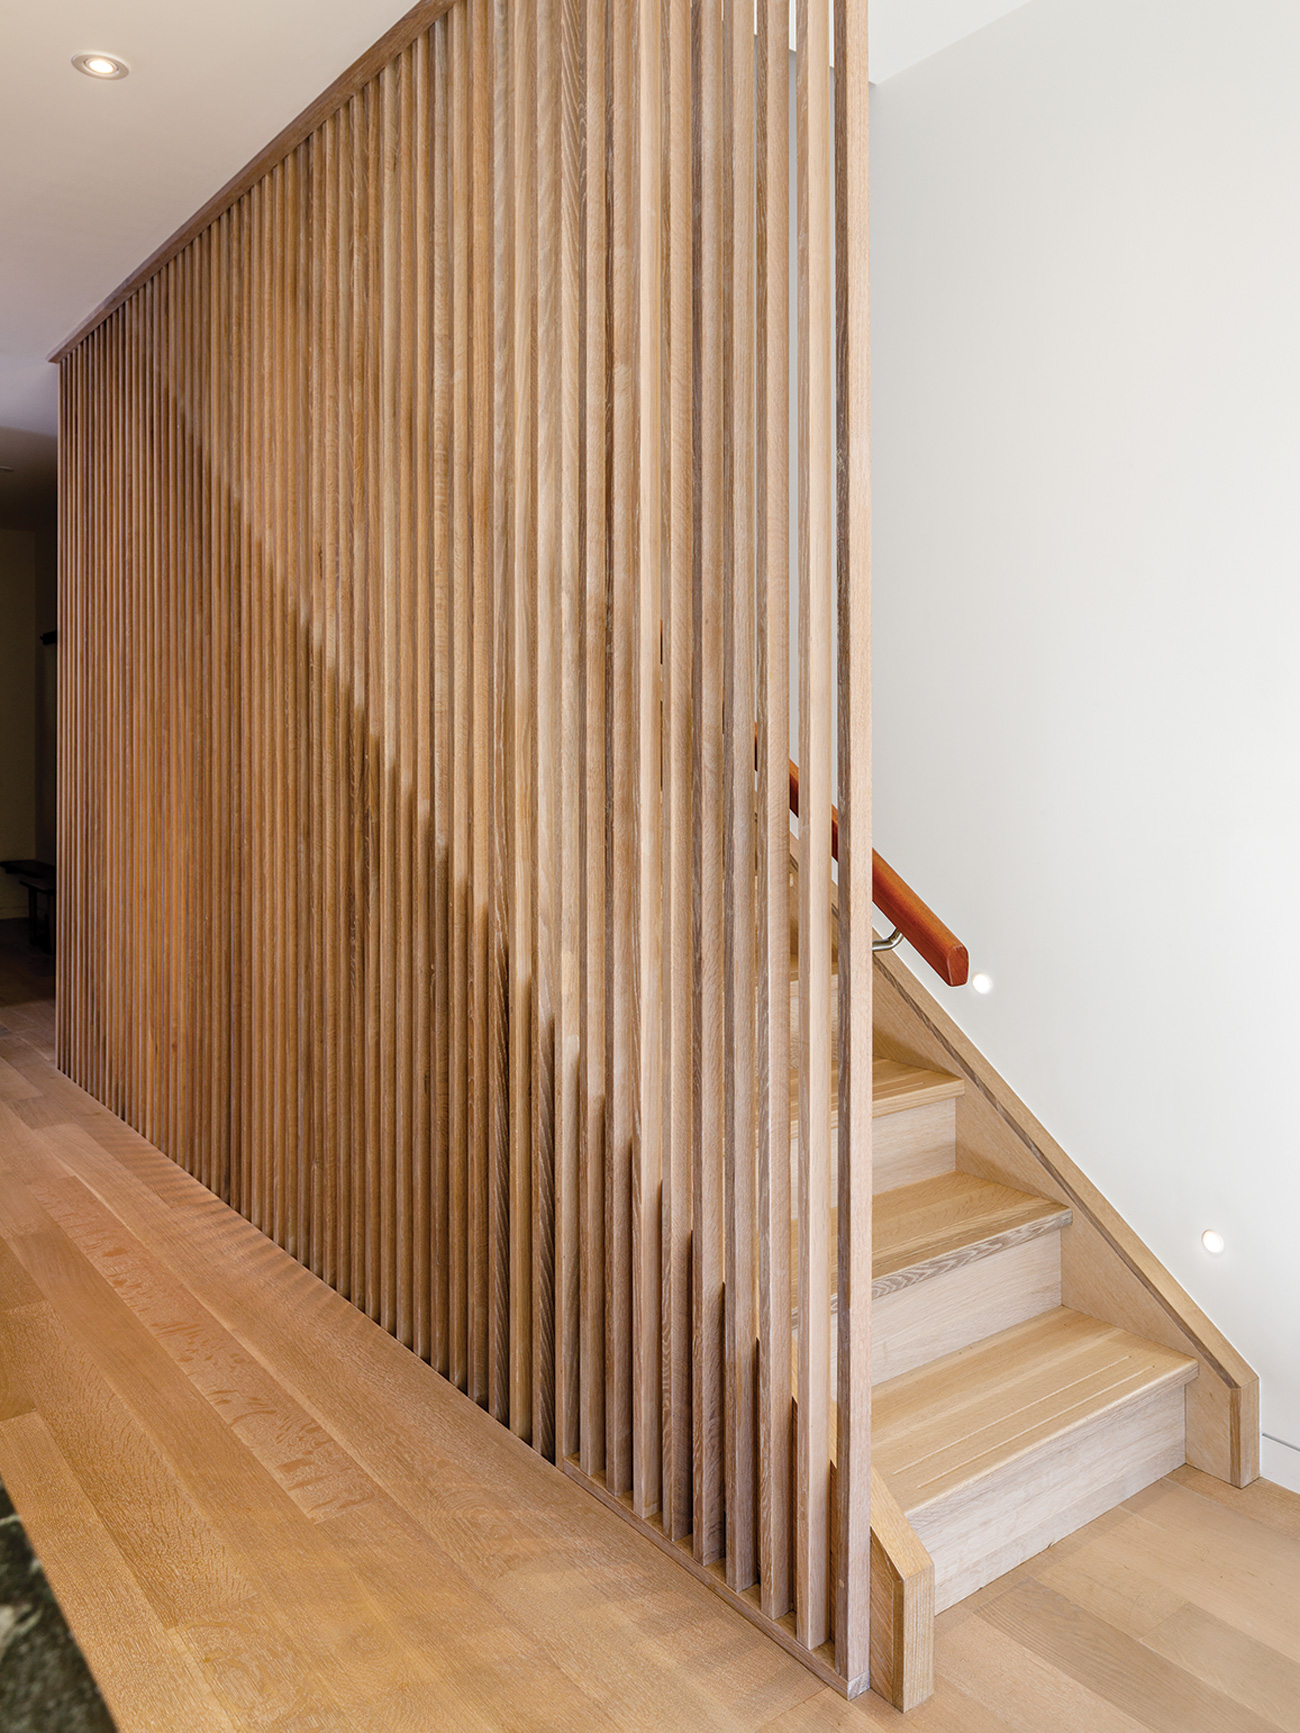 The solid oak staircase features slatted balusters and slip-resistant grooves.